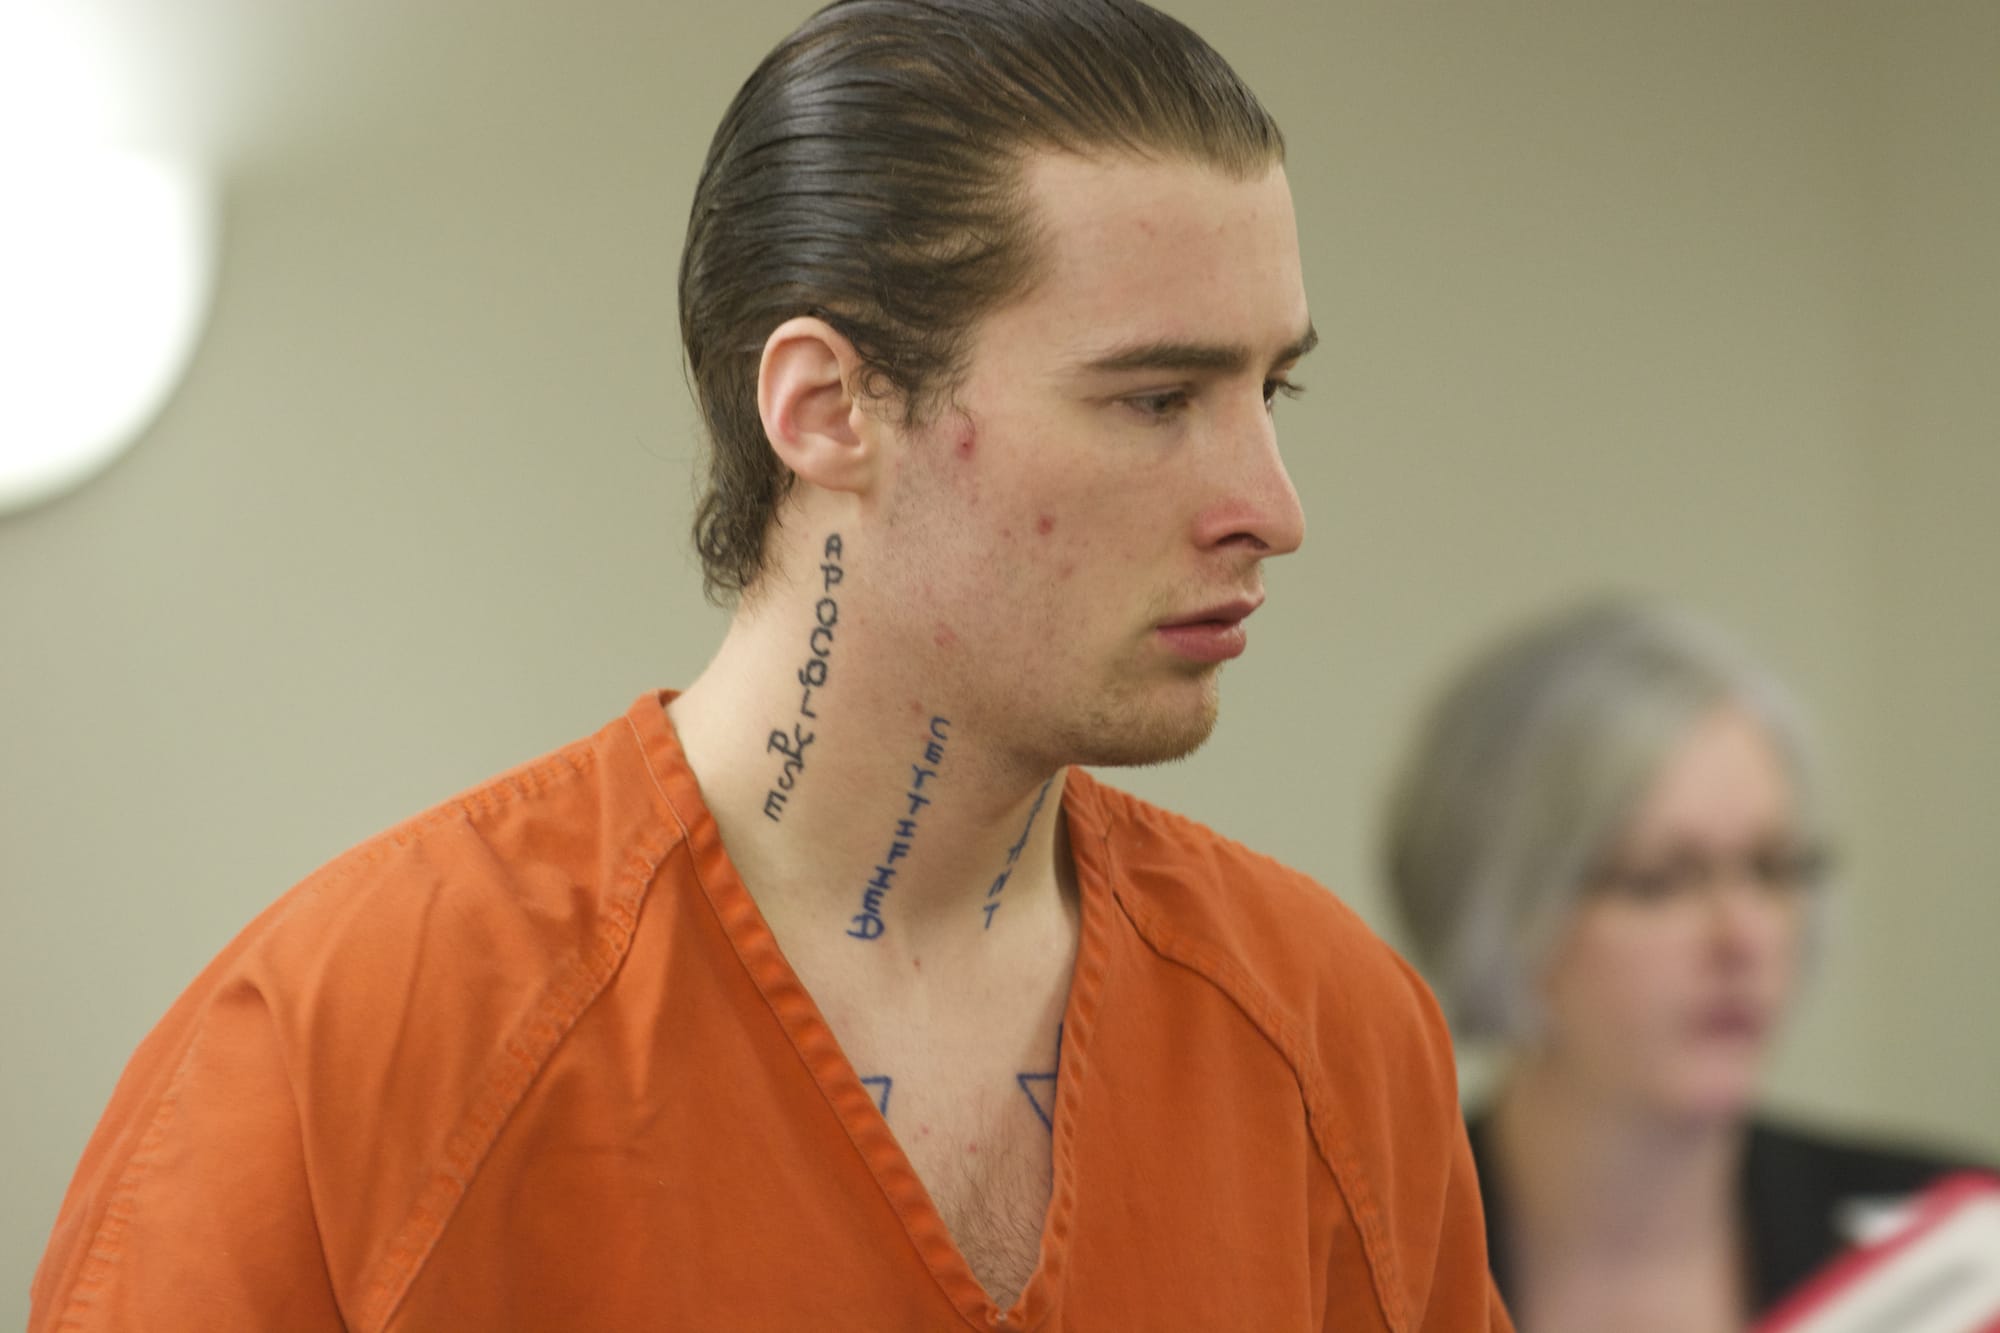 Zacheriah A. Douglas appears in Clark County Superior Court on May 6, 2014, in connection with the shooting death of Craig Moritz in February 2014. Douglas was sentenced Friday to 460 months in prison after pleading guilty to first-degree murder.